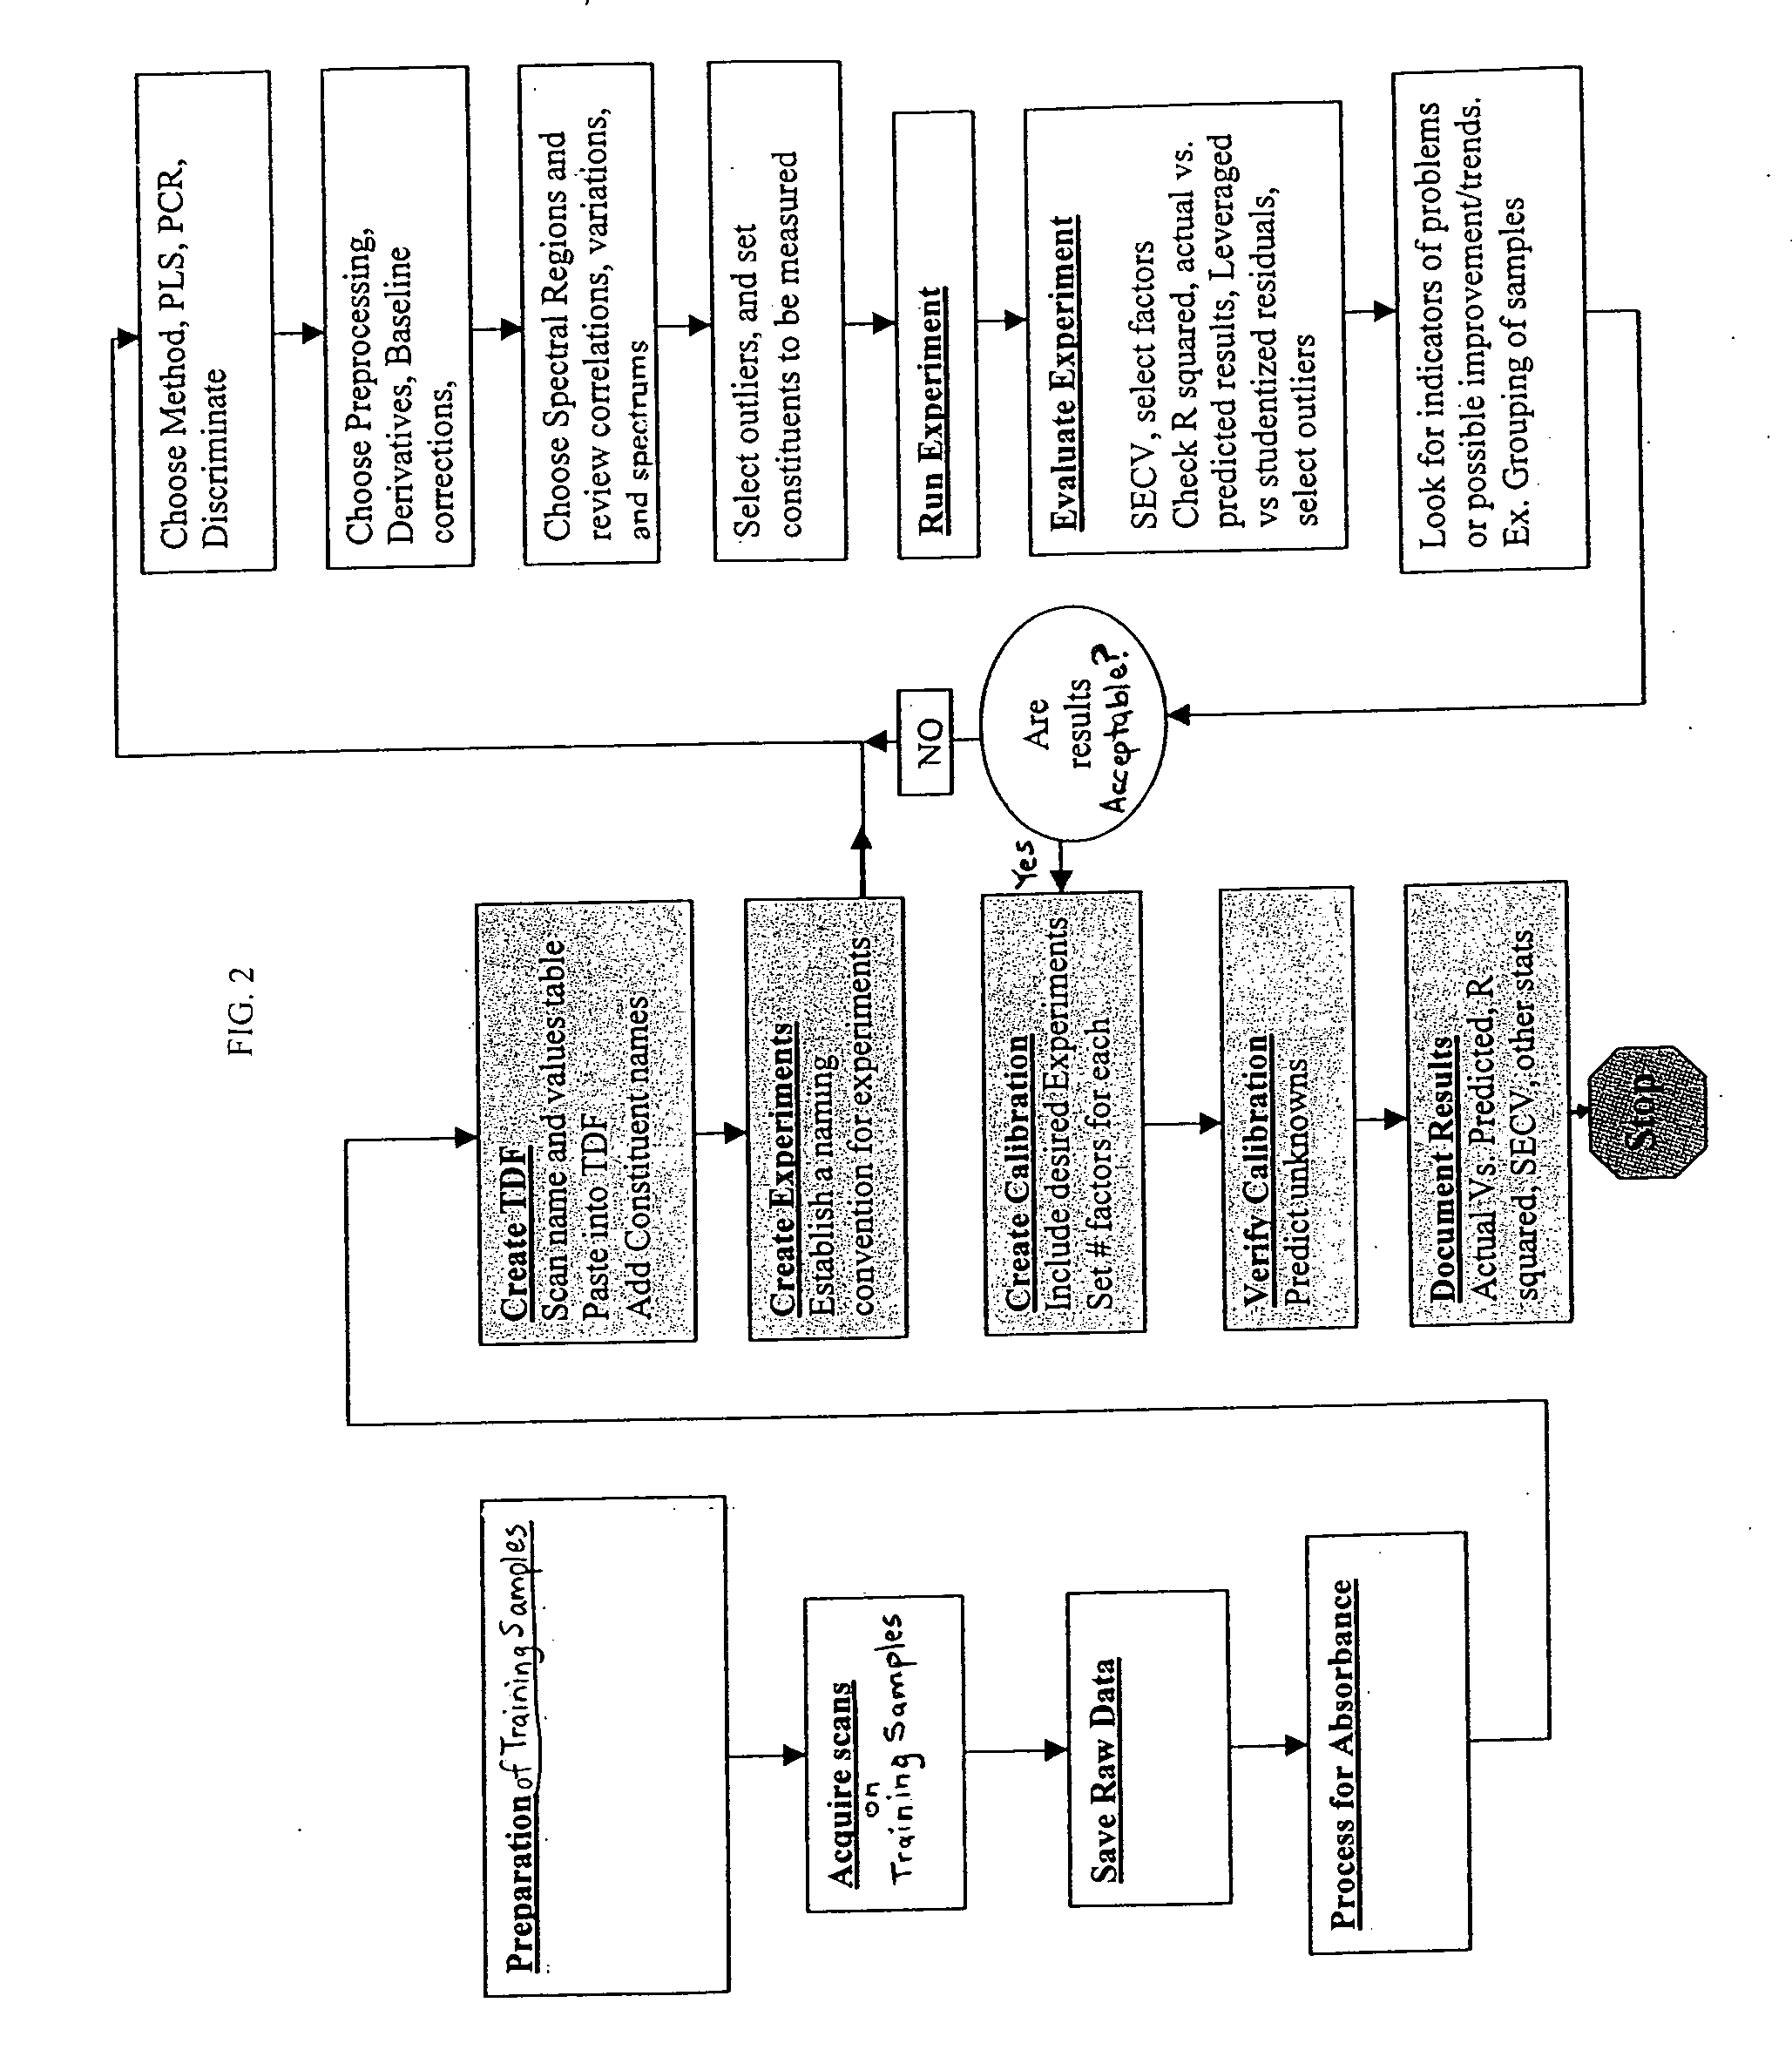 Method using NIR spectroscopy to monitor components of engineered wood products